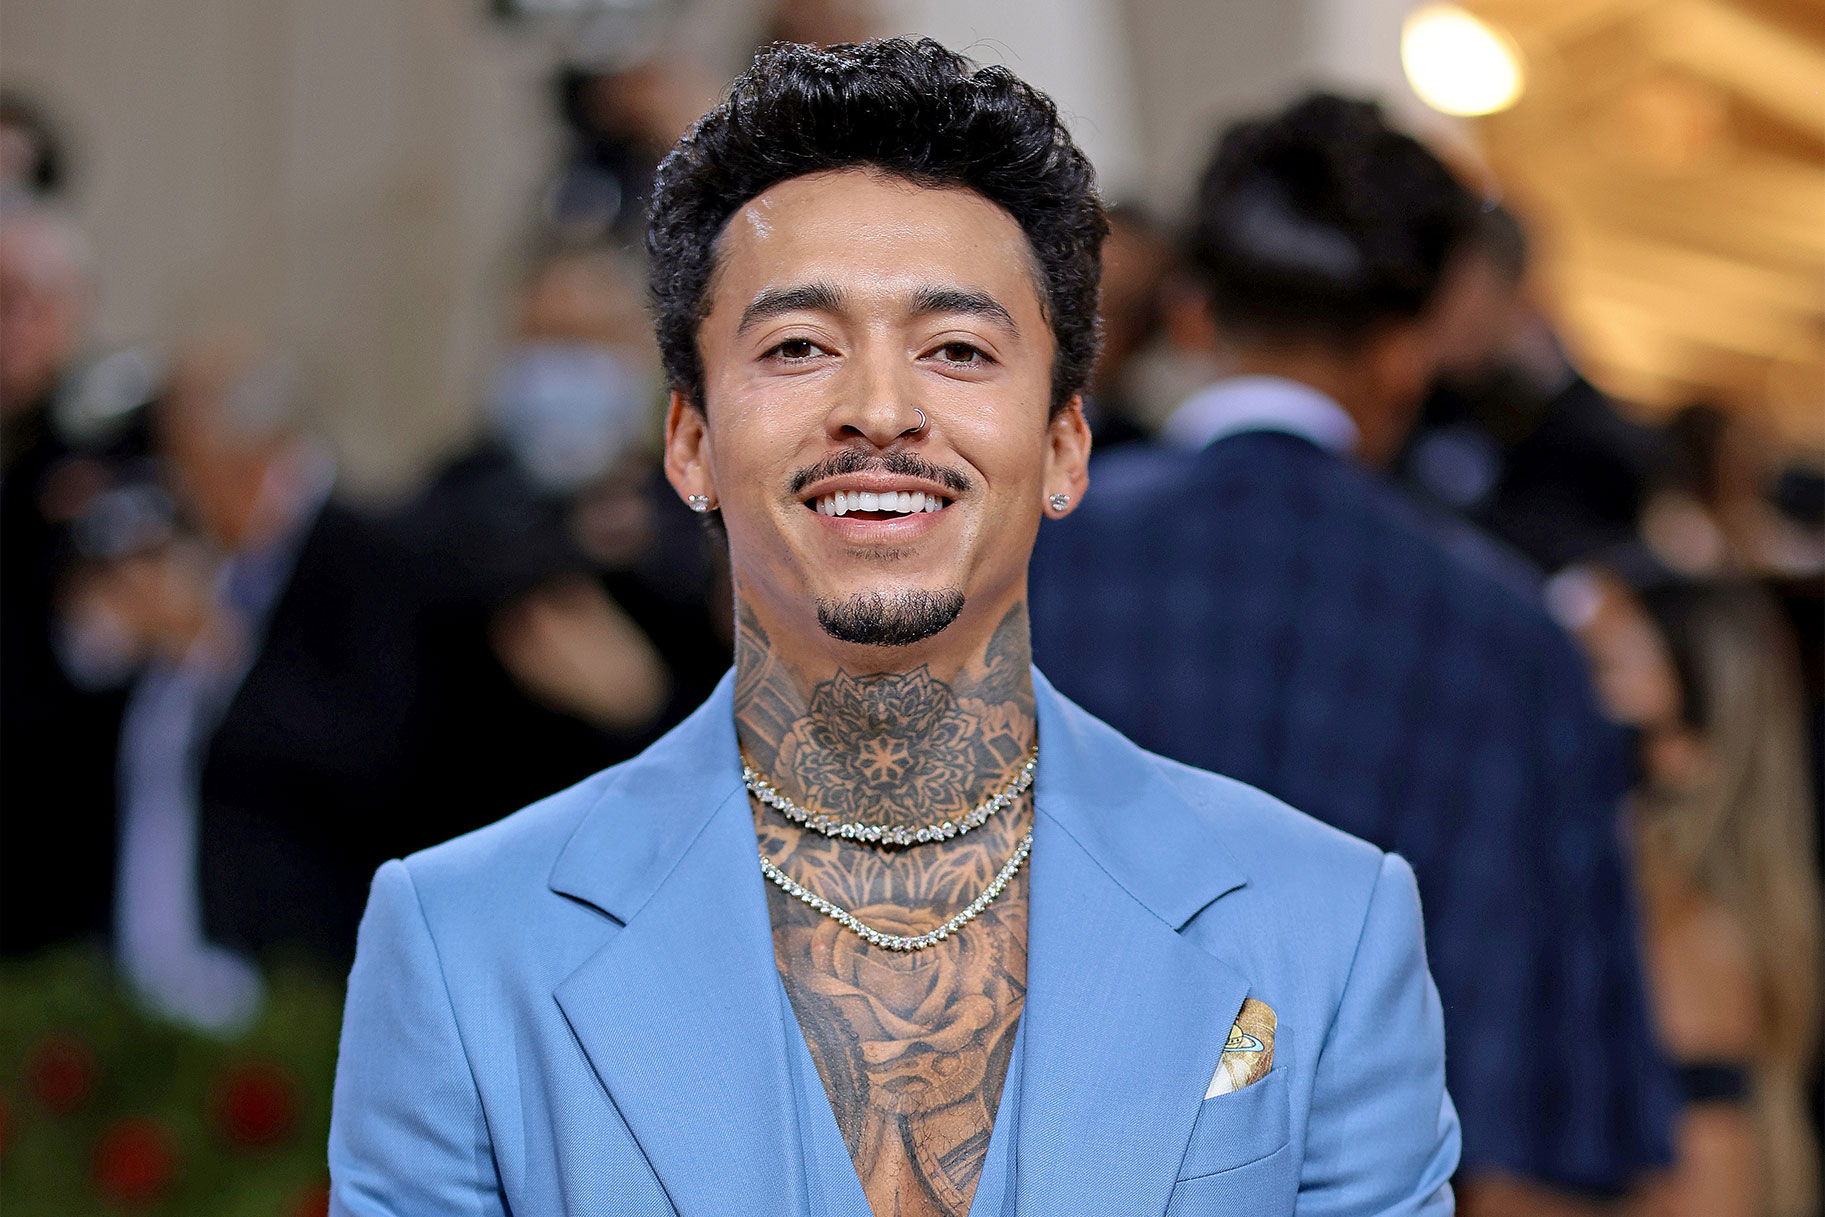 Nyjah Huston attends The 2022 Met Gala Celebrating "In America: An Anthology of Fashion" at The Metropolitan Museum of Art on May 02, 2022 in New York City